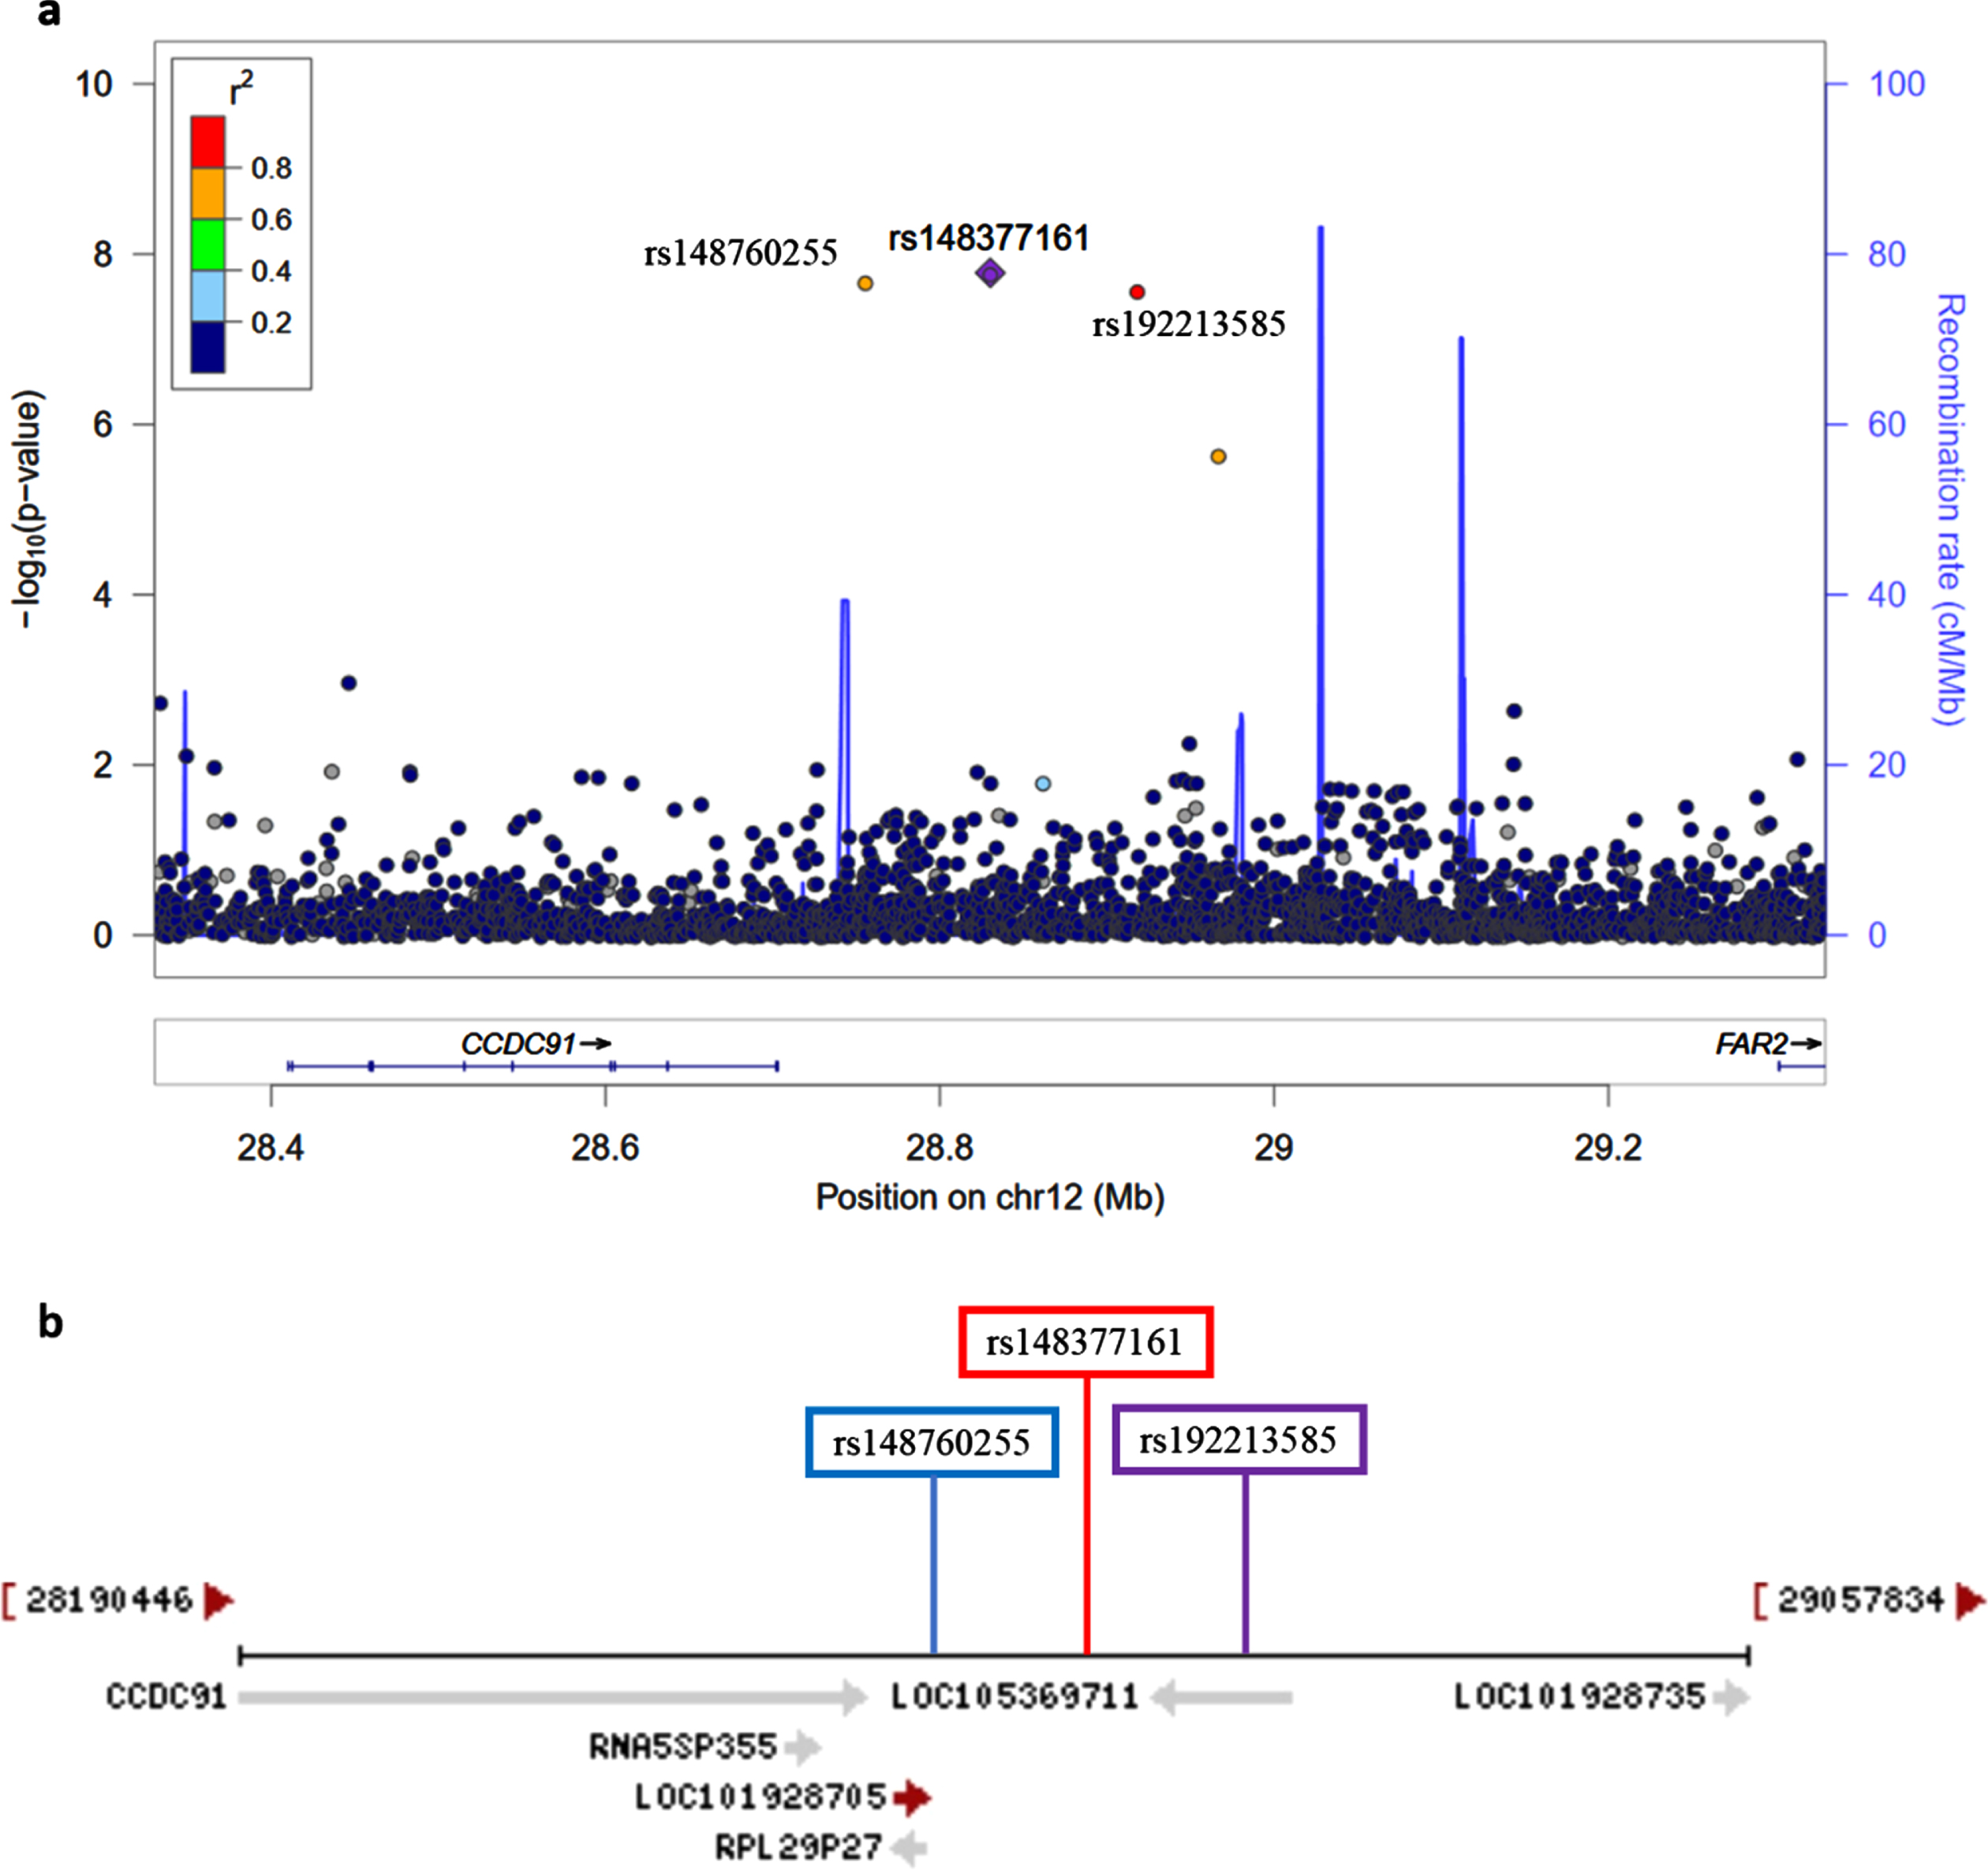 a) Regional association plot on chromosome 12 centered around the most significant SNP, rs148377161 (p = 1.66E-08) based on GRCh37 assembly. b) Locations of predicted non-coding RNAs genes and three top SNPs relative to CCDC91 based on the NCBI’s gene prediction program Gnomon and GRCh38 assembly.